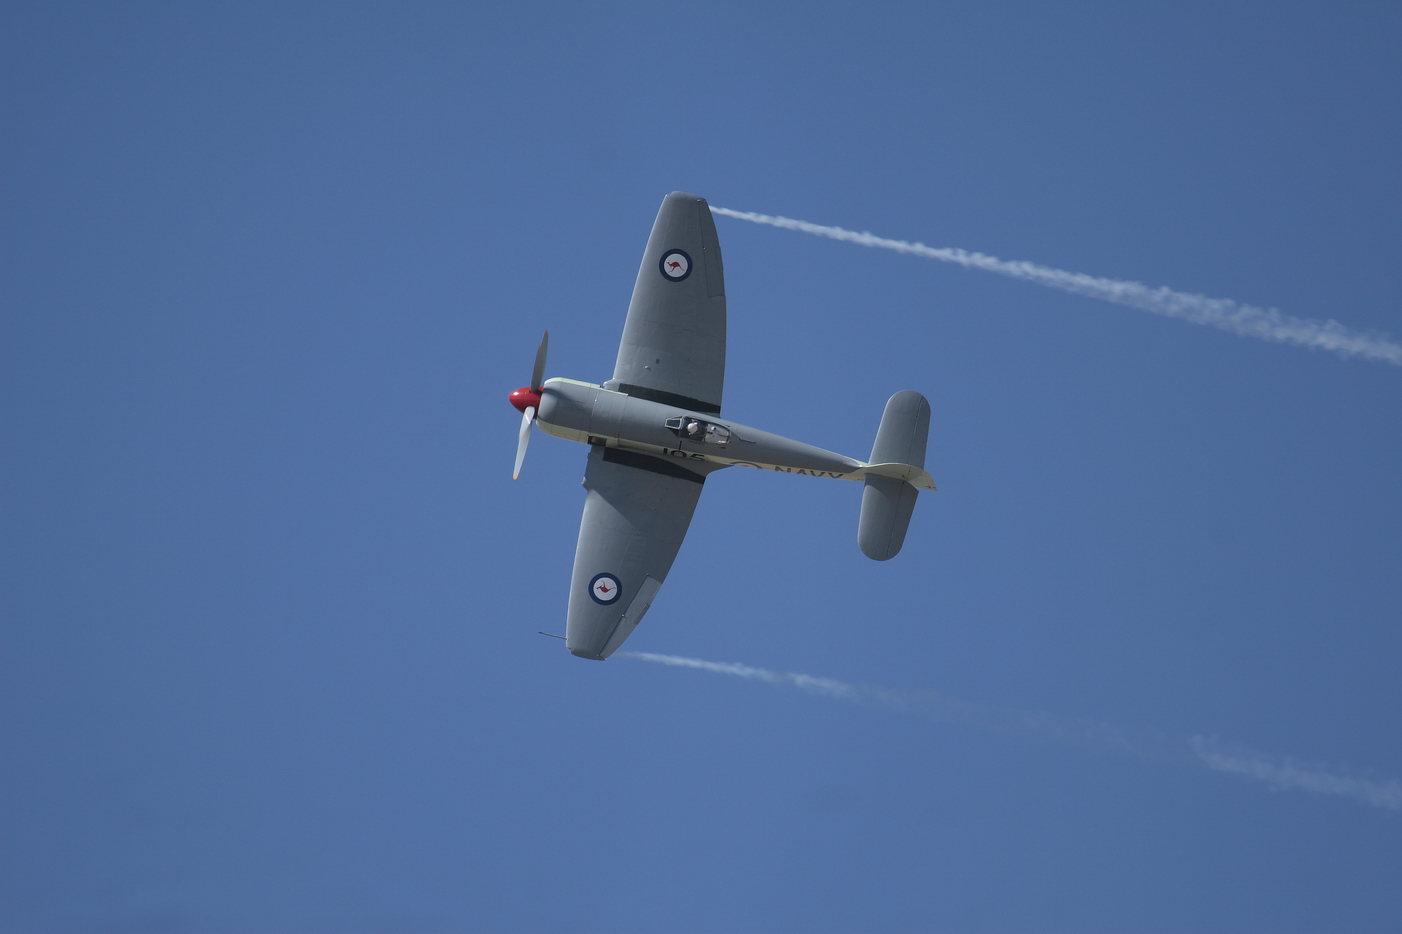 Another of the Sea Fury